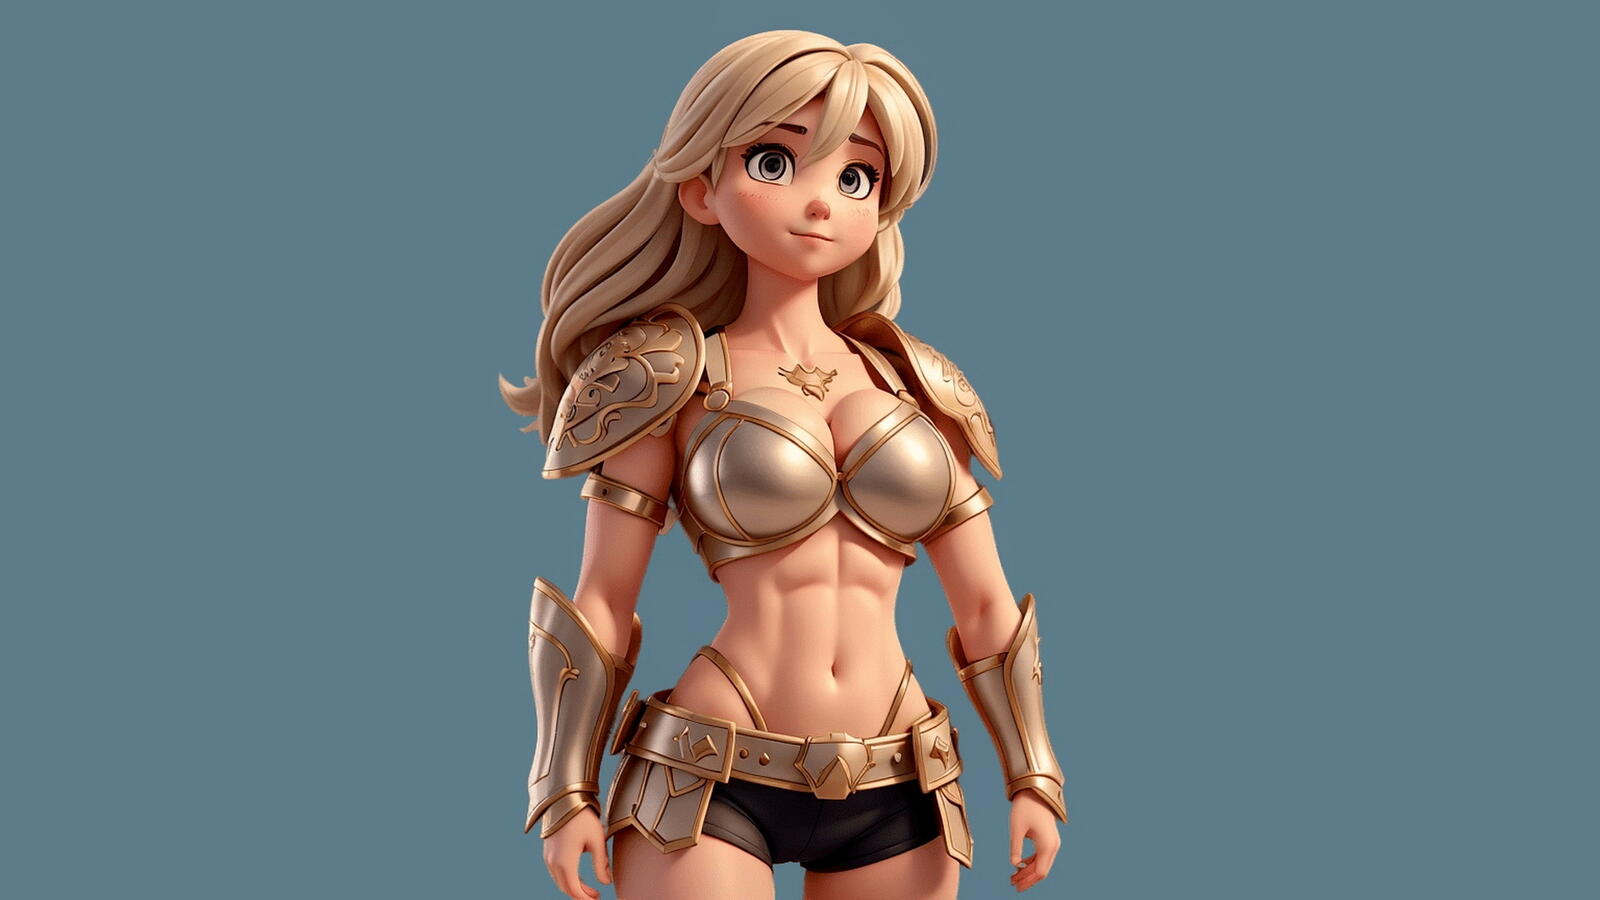 Free photo Blonde girl in shorts and armor on gray background